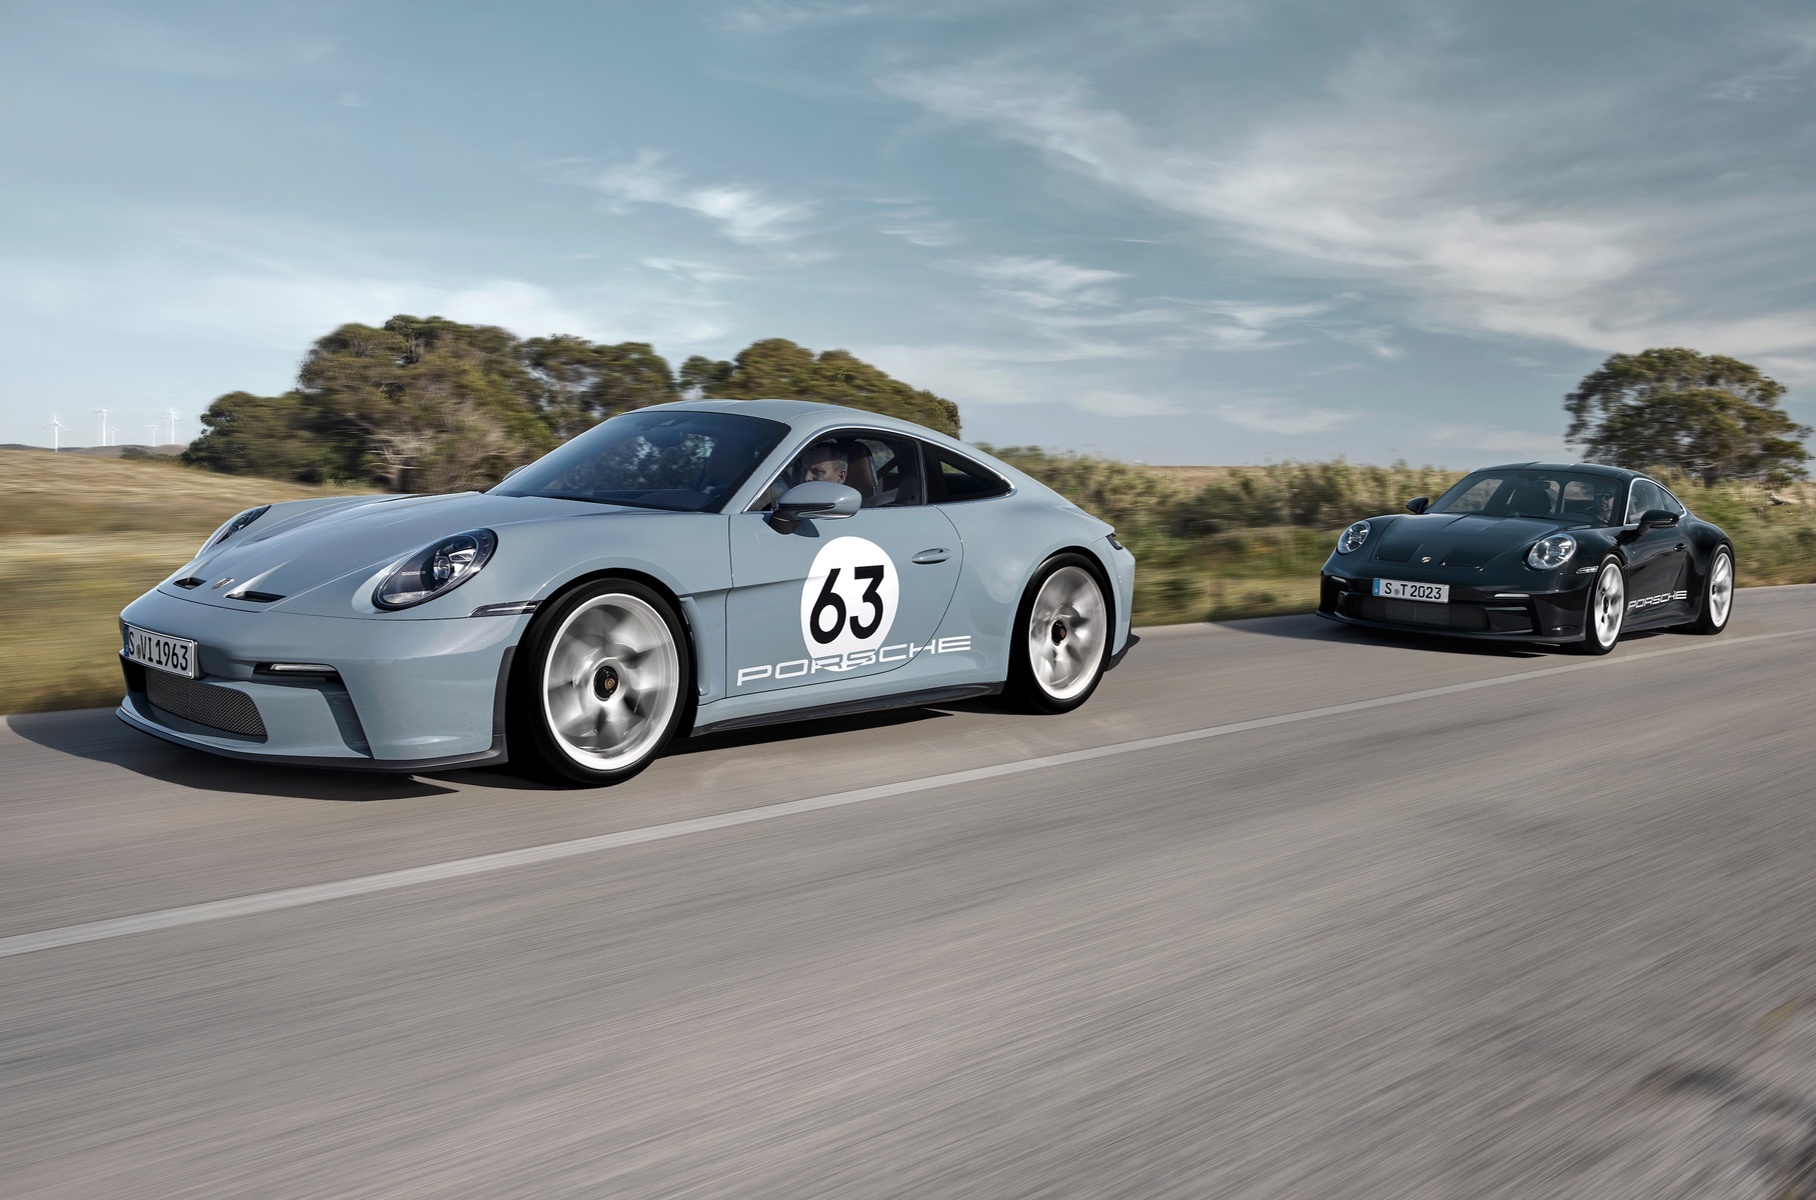 Superlight Porsche 911 S/T unveiled with engine from 911 GT3 RS